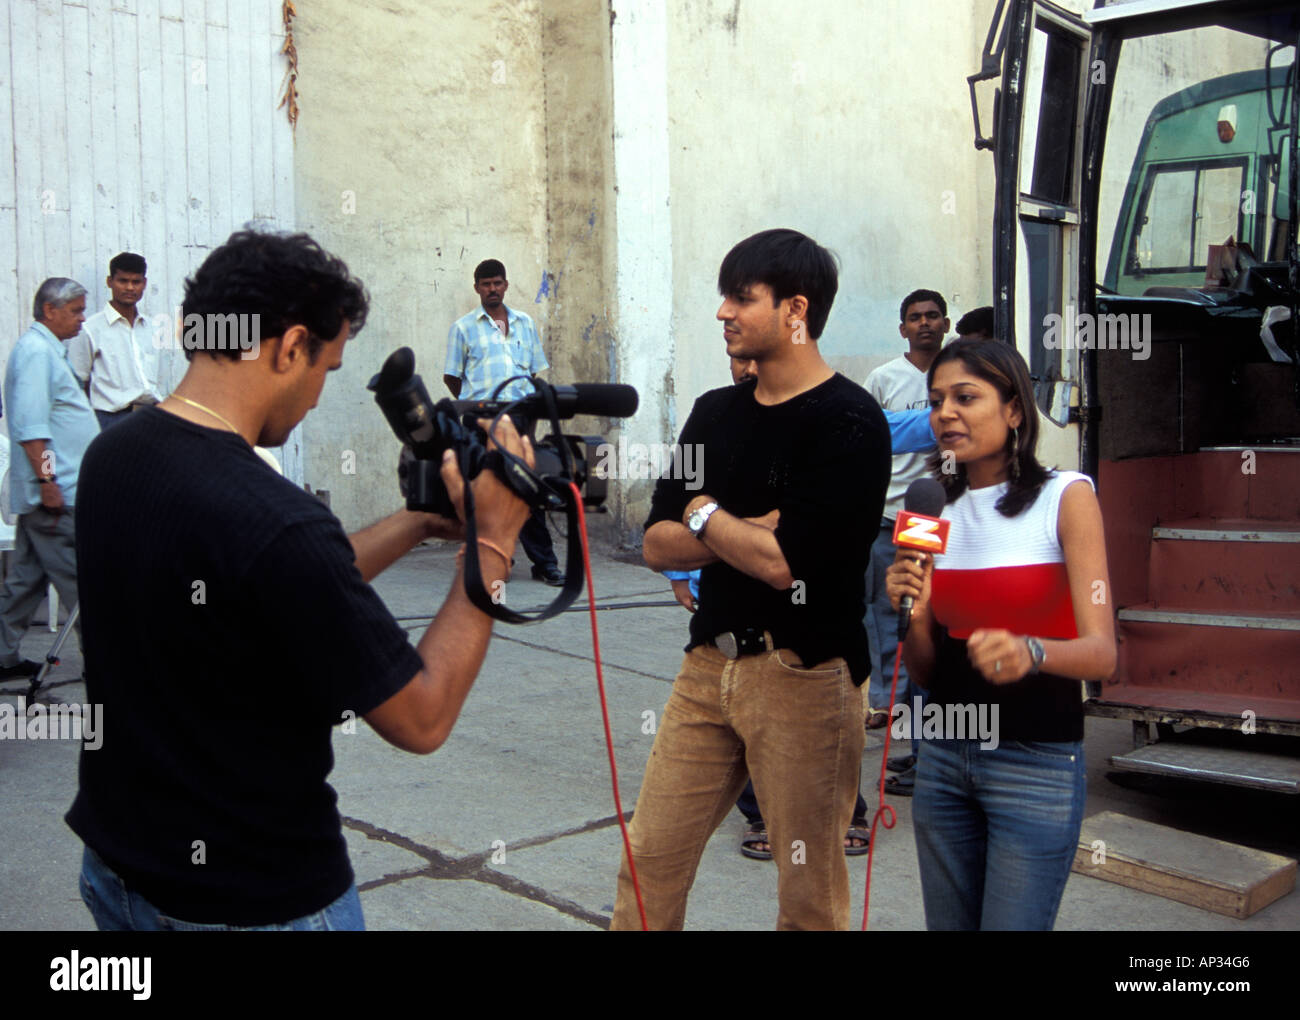 Vivek Oberoi being interviewed during a break in filming for 'Masti', Mumbai, South India Stock Photo